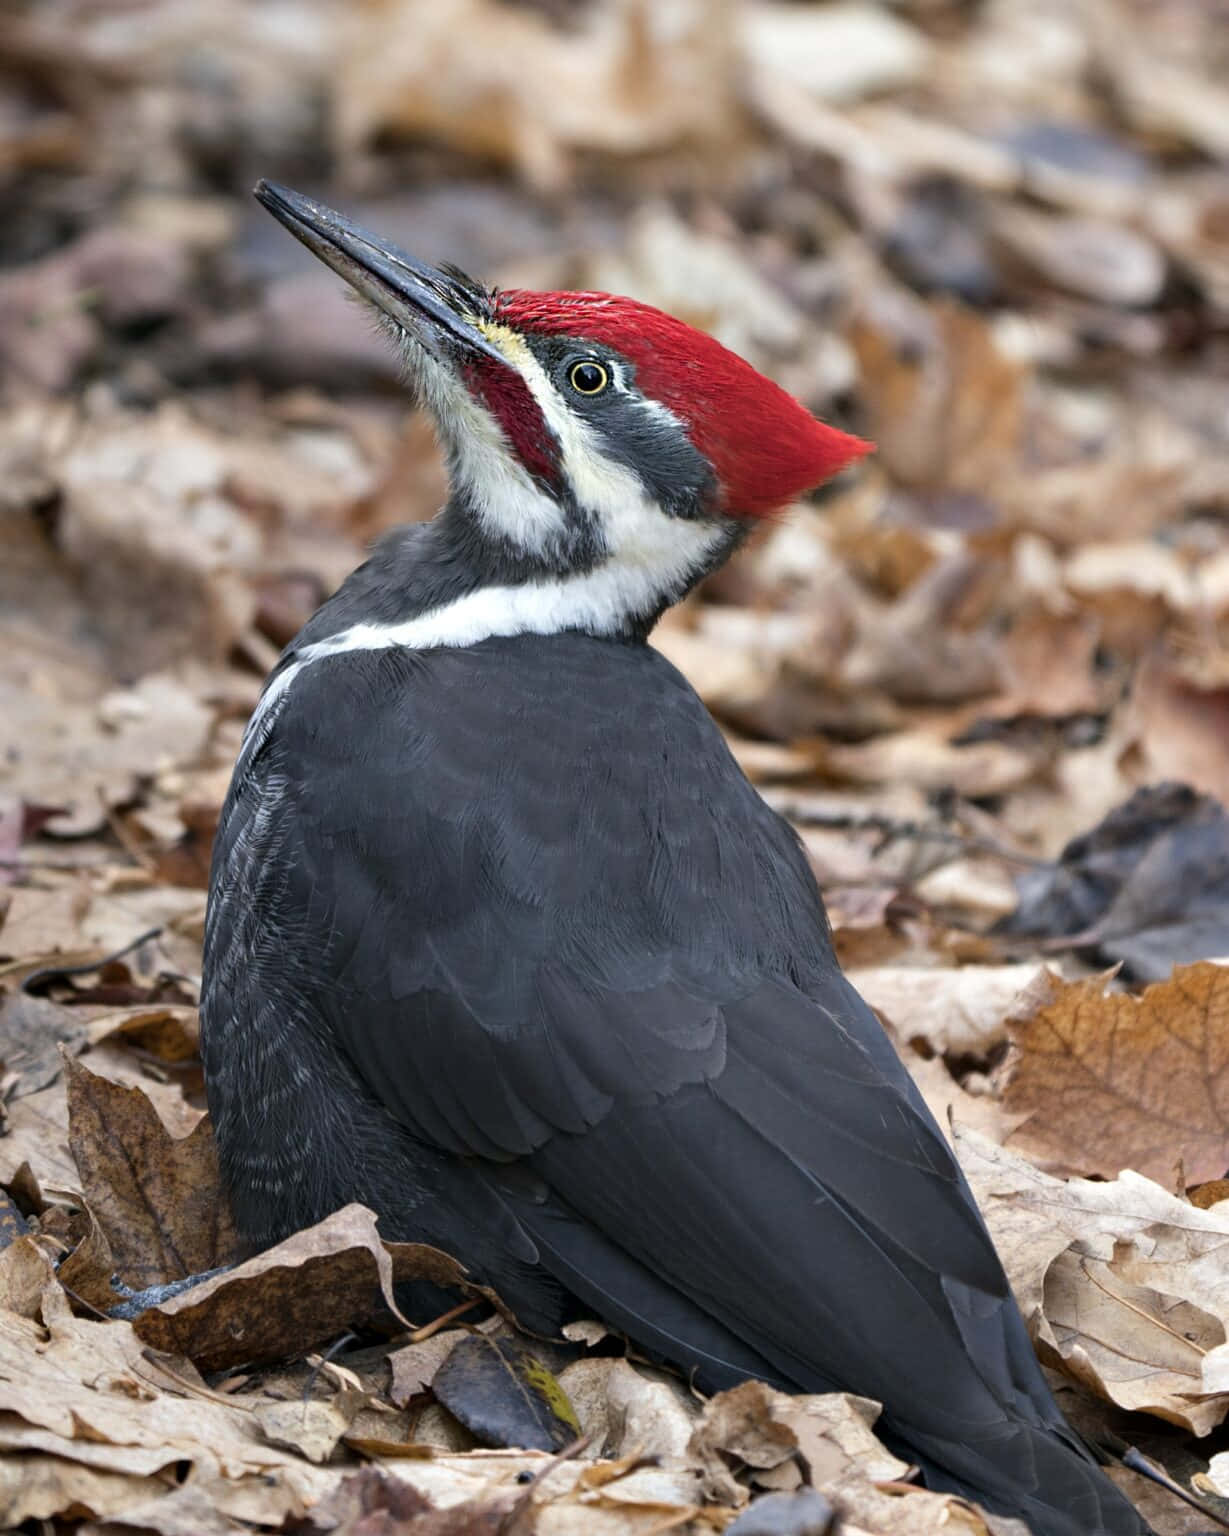 A beautiful red-headed woodpecker perched on a branch